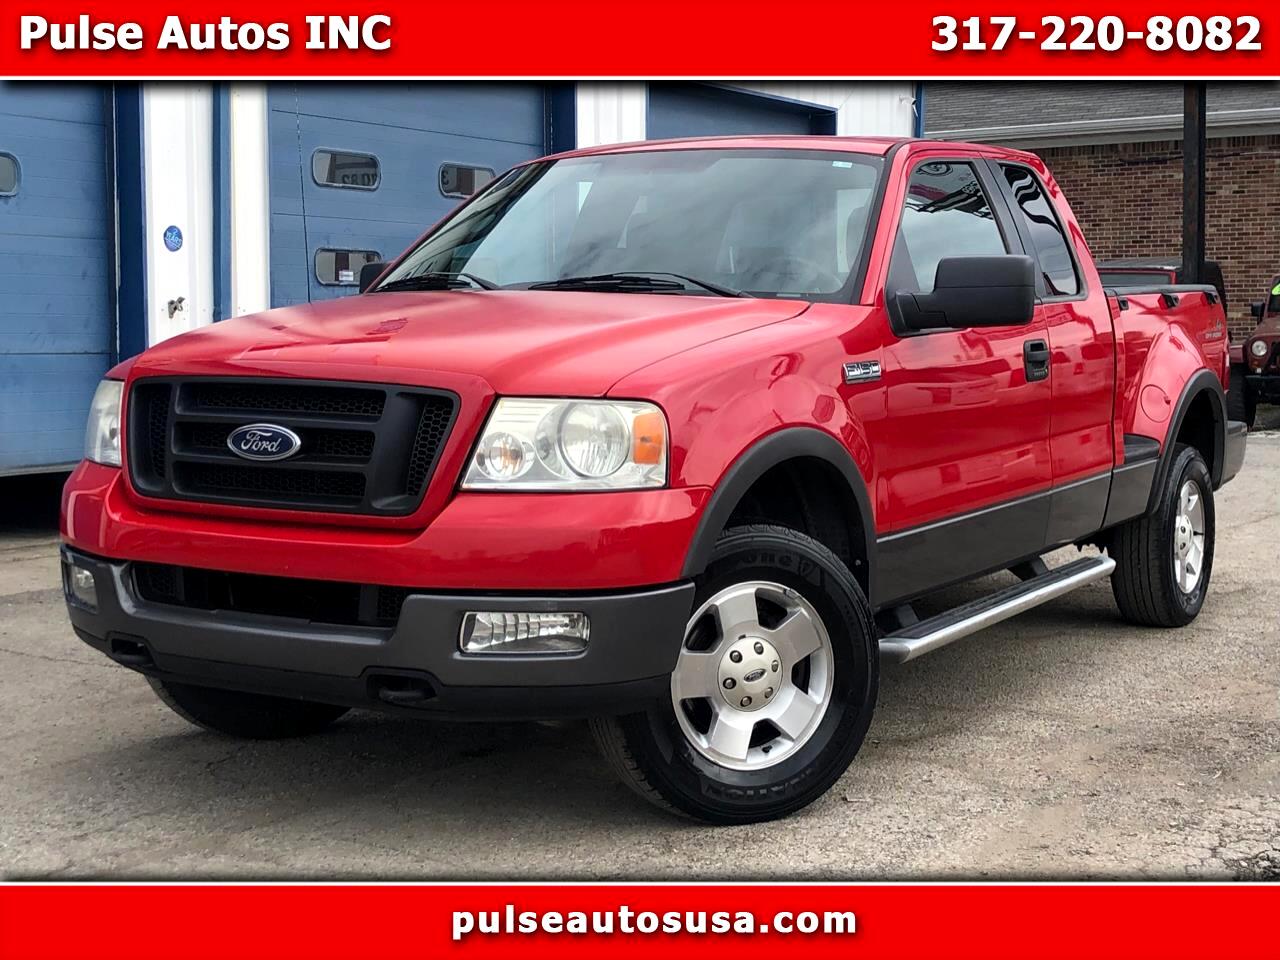 Ford F-150 FX4 SuperCab Flareside 4WD 2005